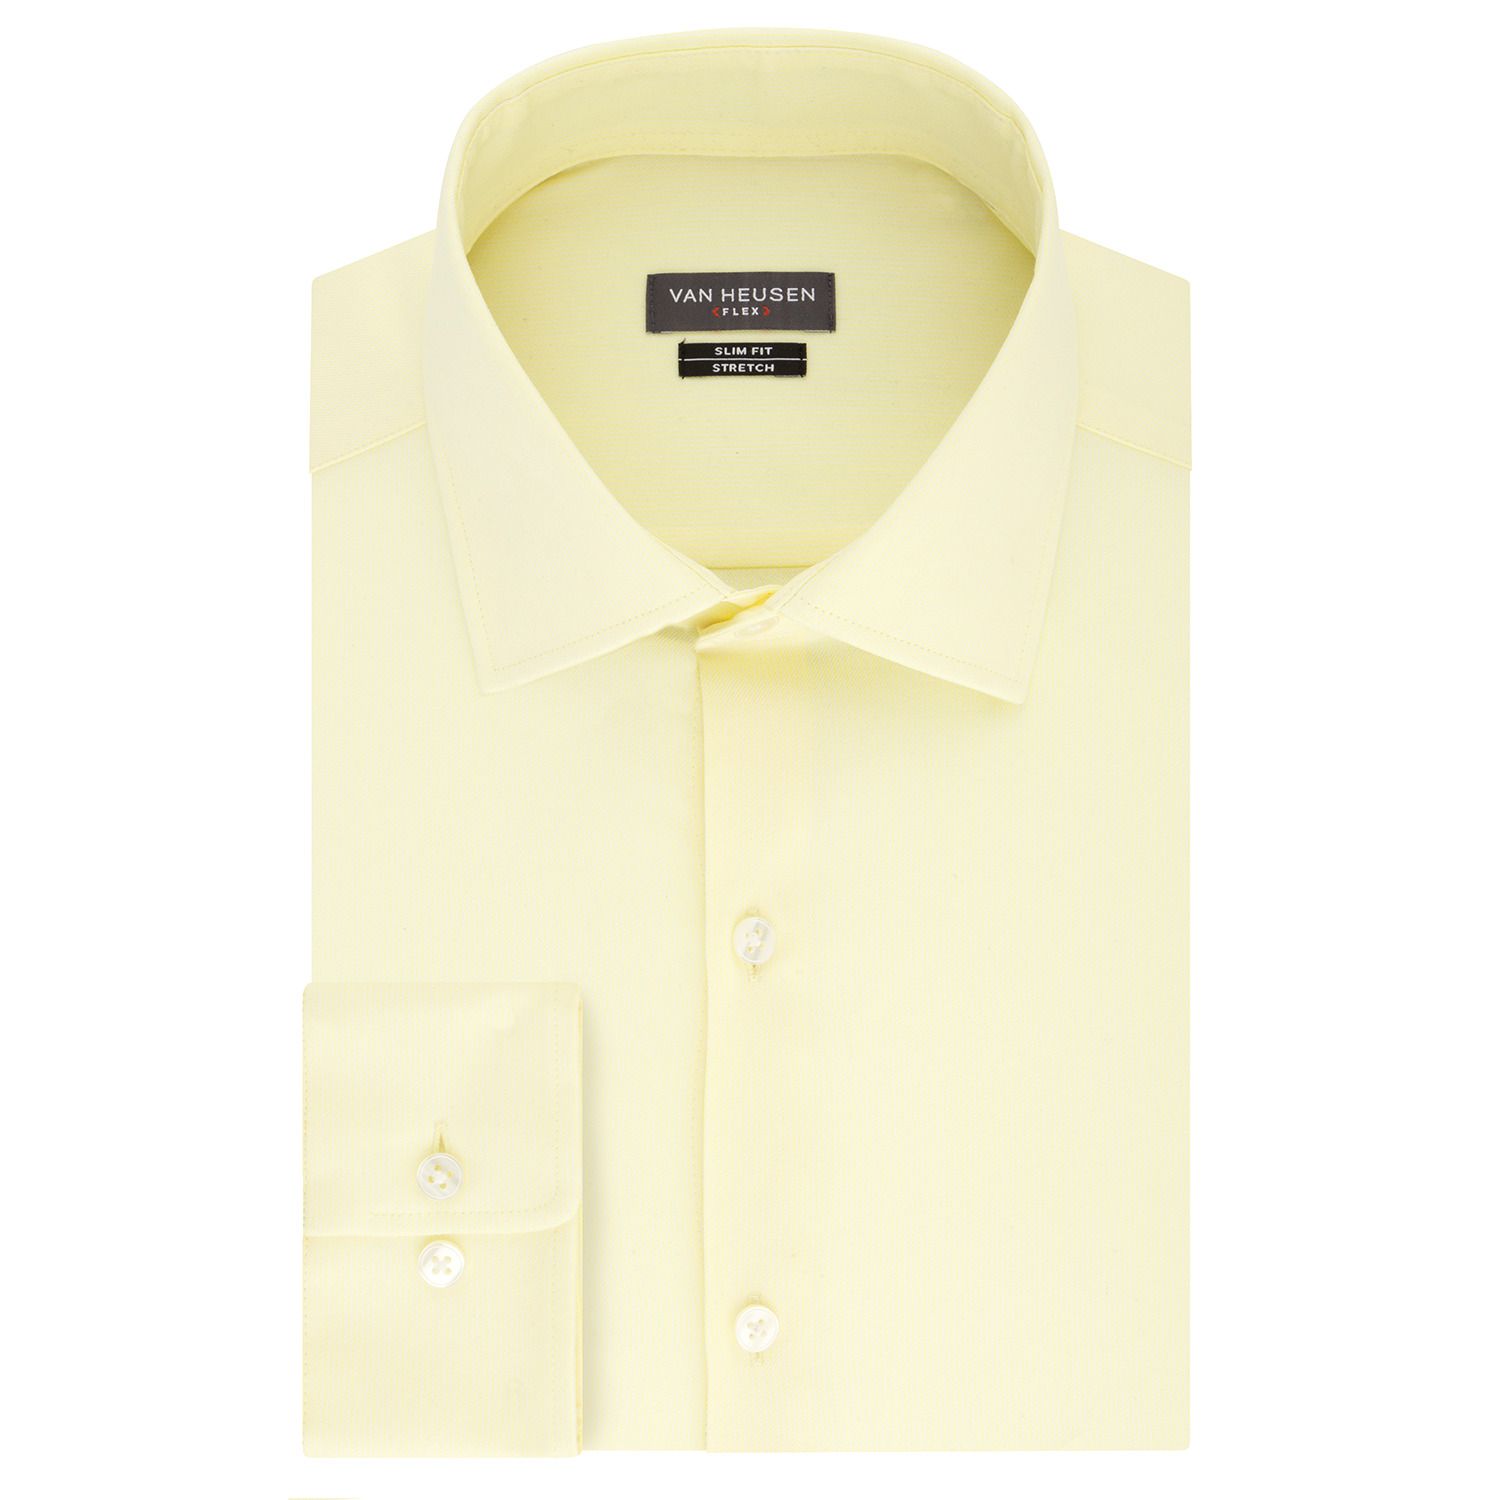 Men's Yellow Dress Shirts: Stand Out in ...